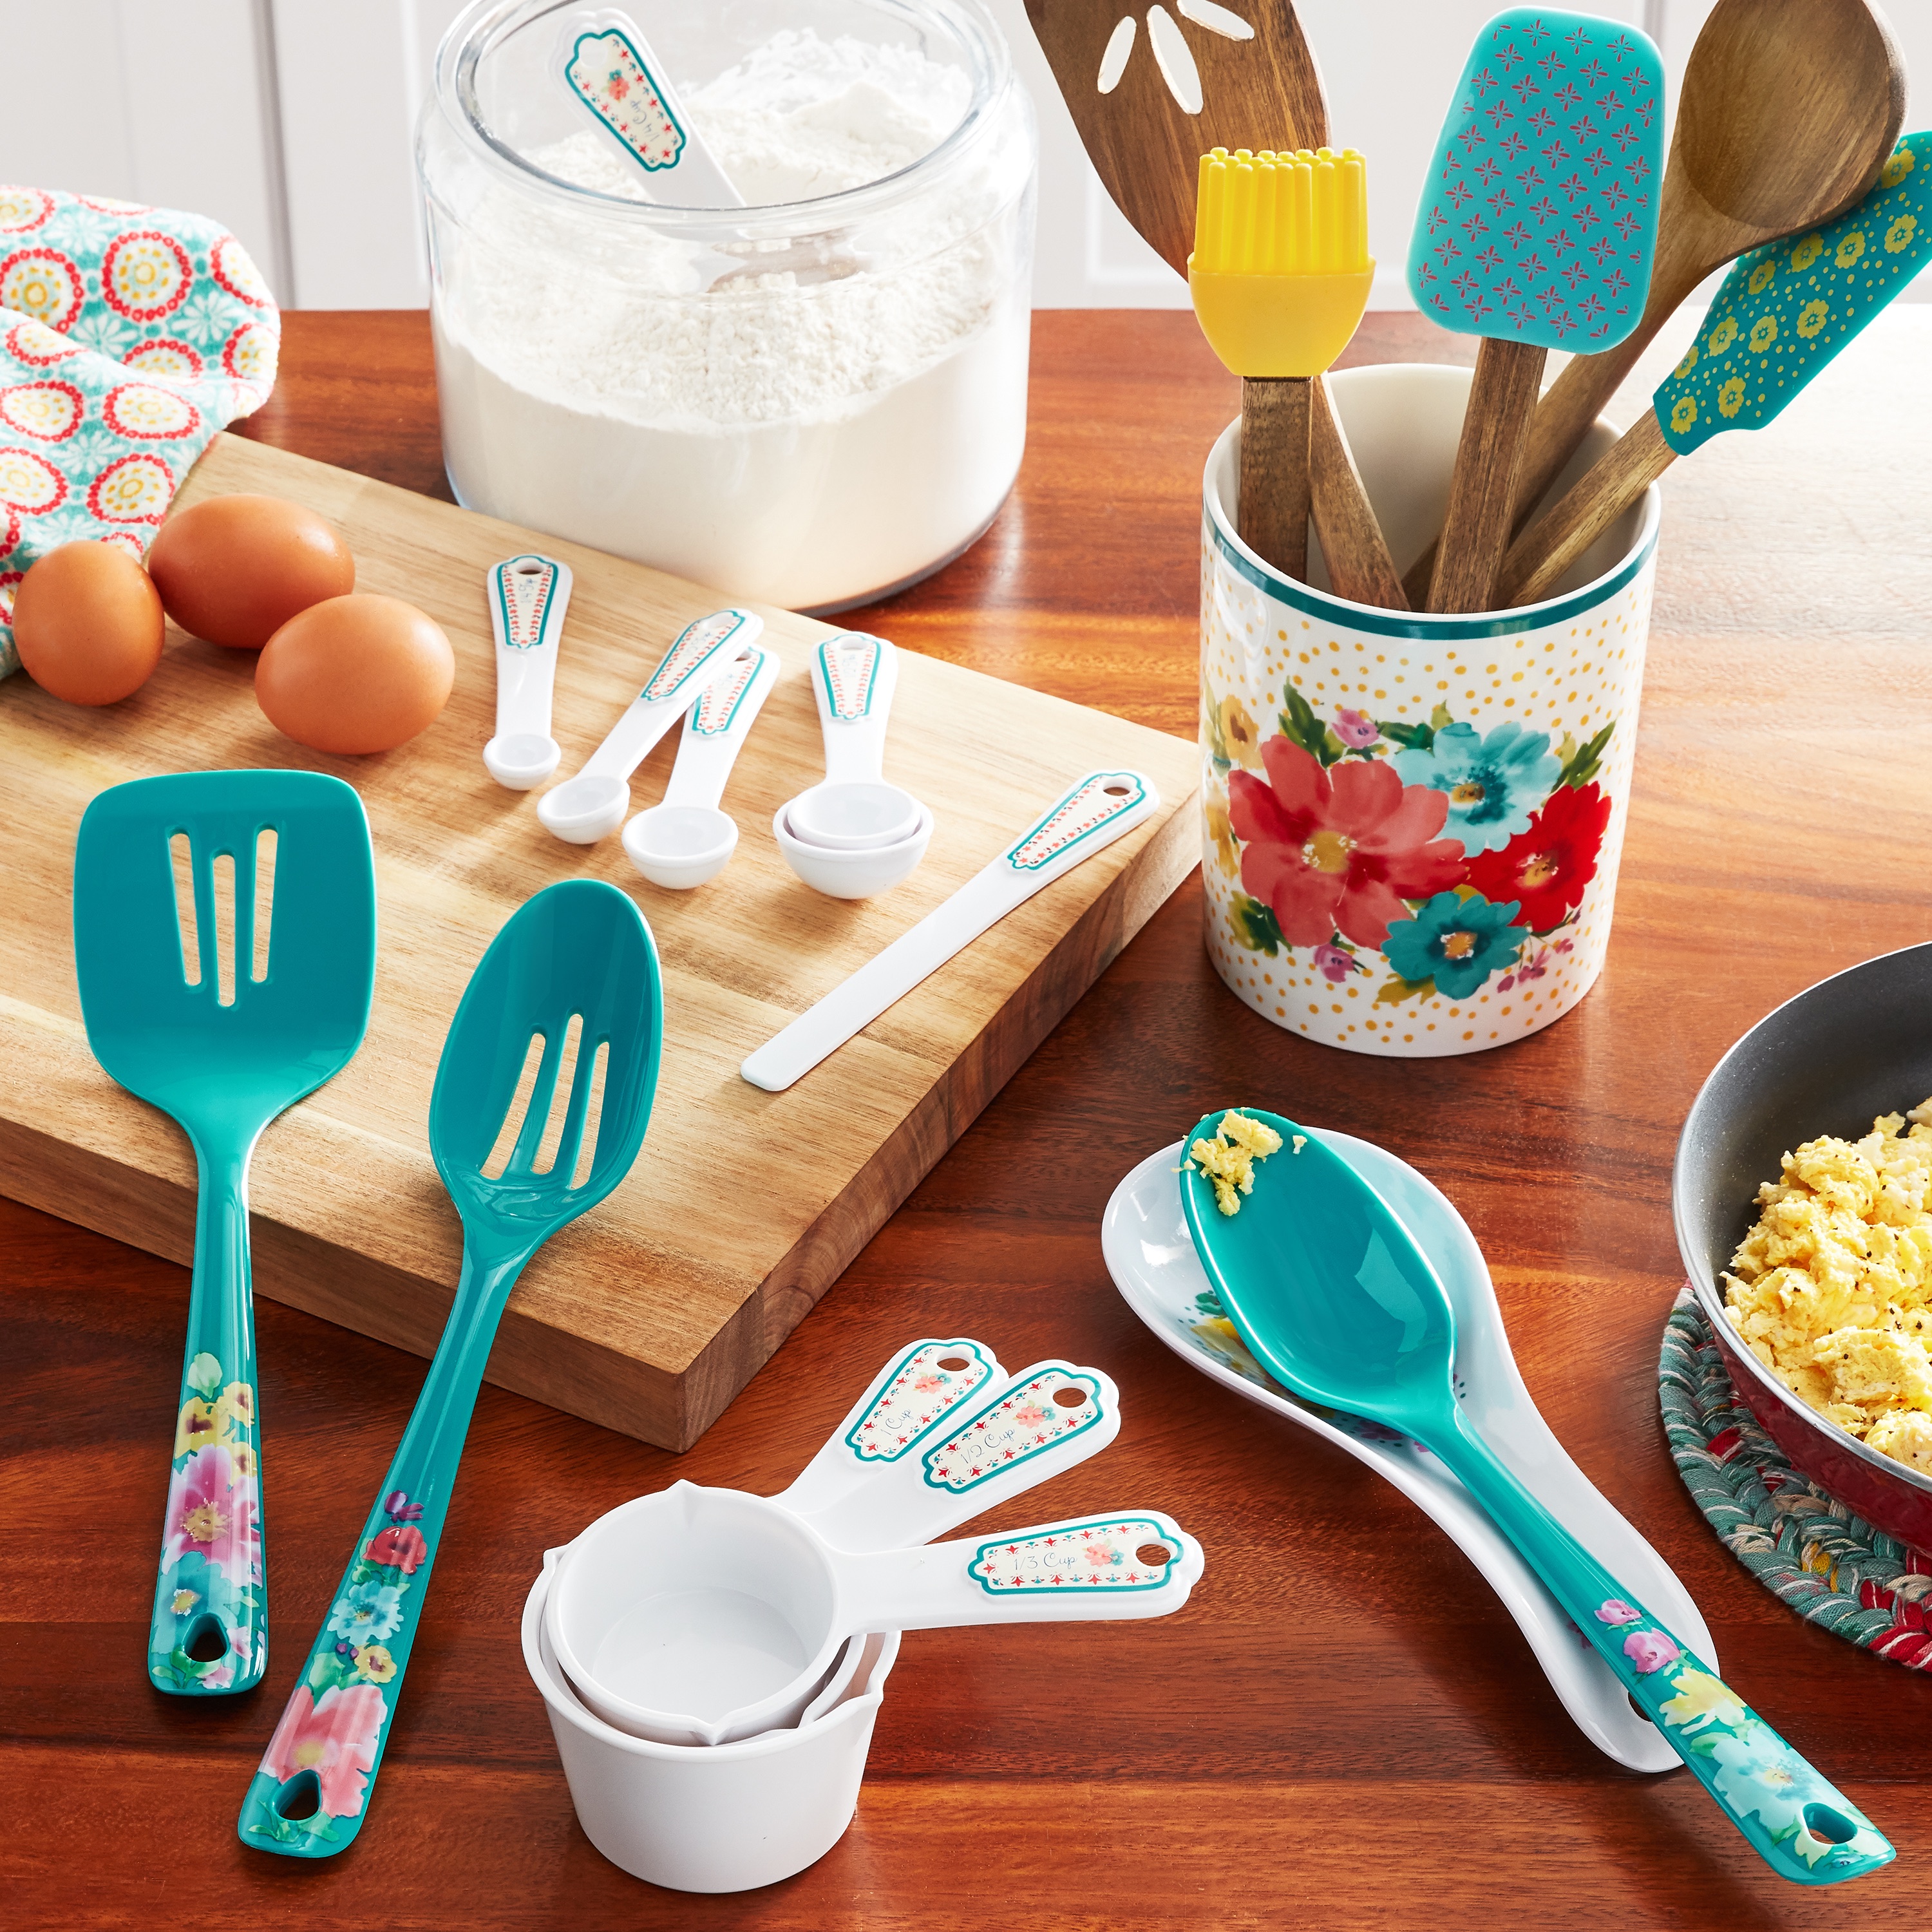 The Pioneer Woman Breezy Blossom 20-Piece Tool and Crock Set - image 3 of 7